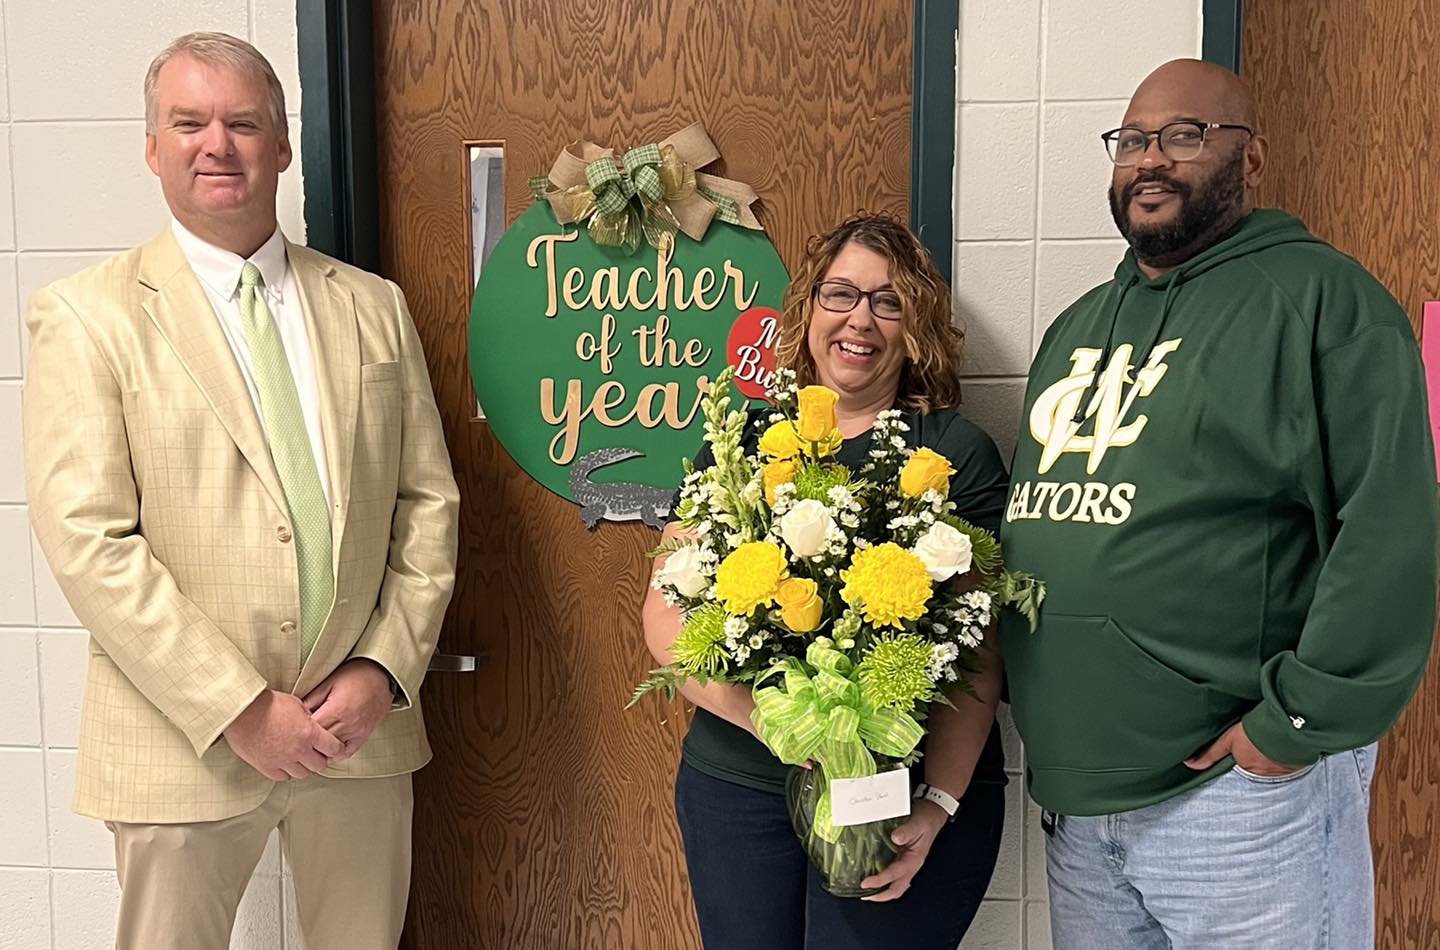 teacher with bouquet of yellow and green flowers in front of "teacher of the year" sign